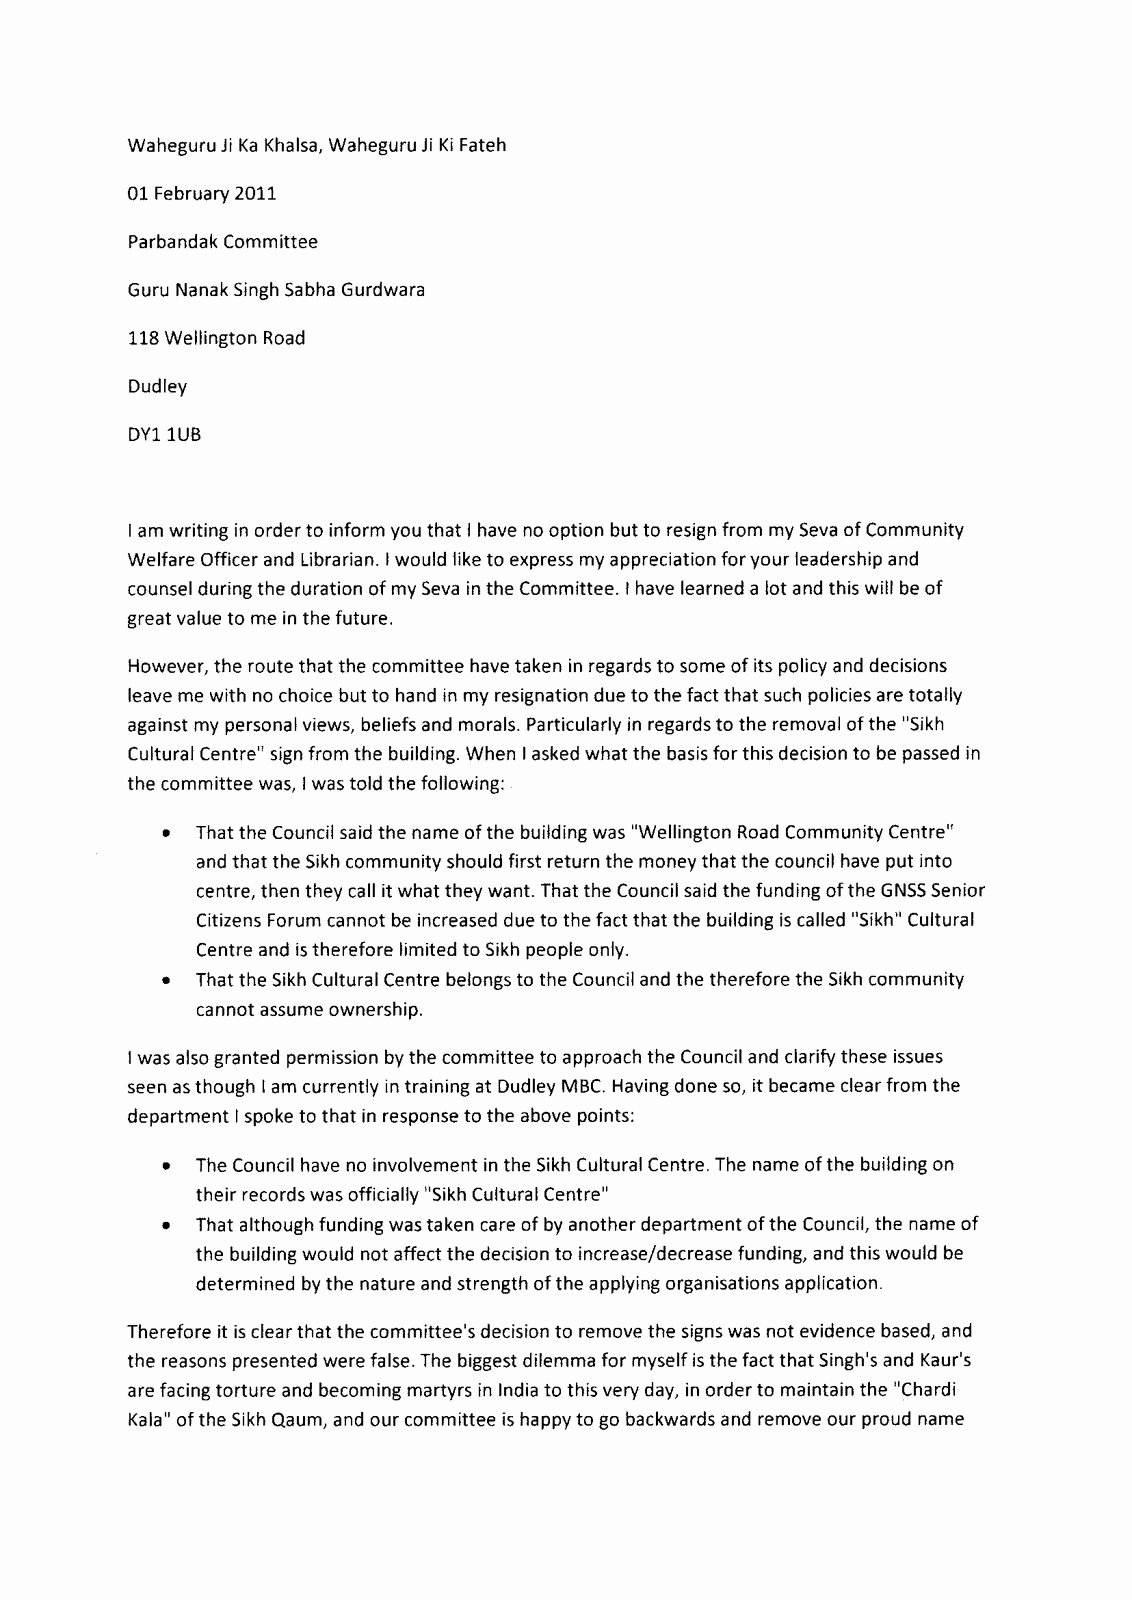 Letter Of Resignation From Committee Fresh Satkaar Campaign Gnss Dudley Gurdwara Mittee